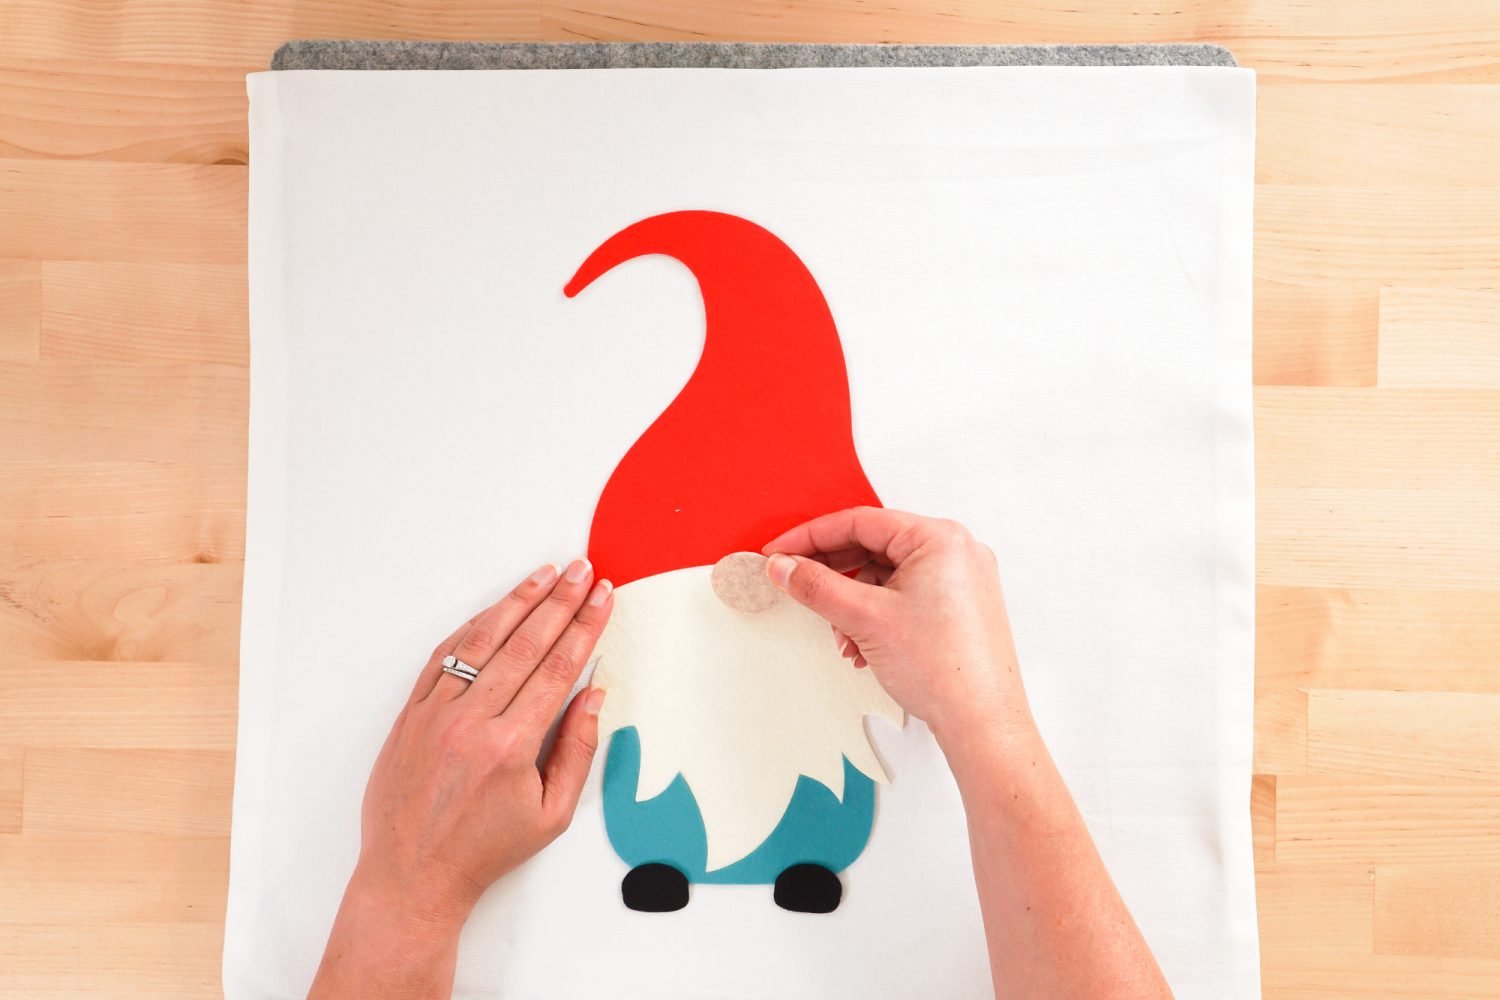 Hands placing all of the gnome pieces on the pillow.